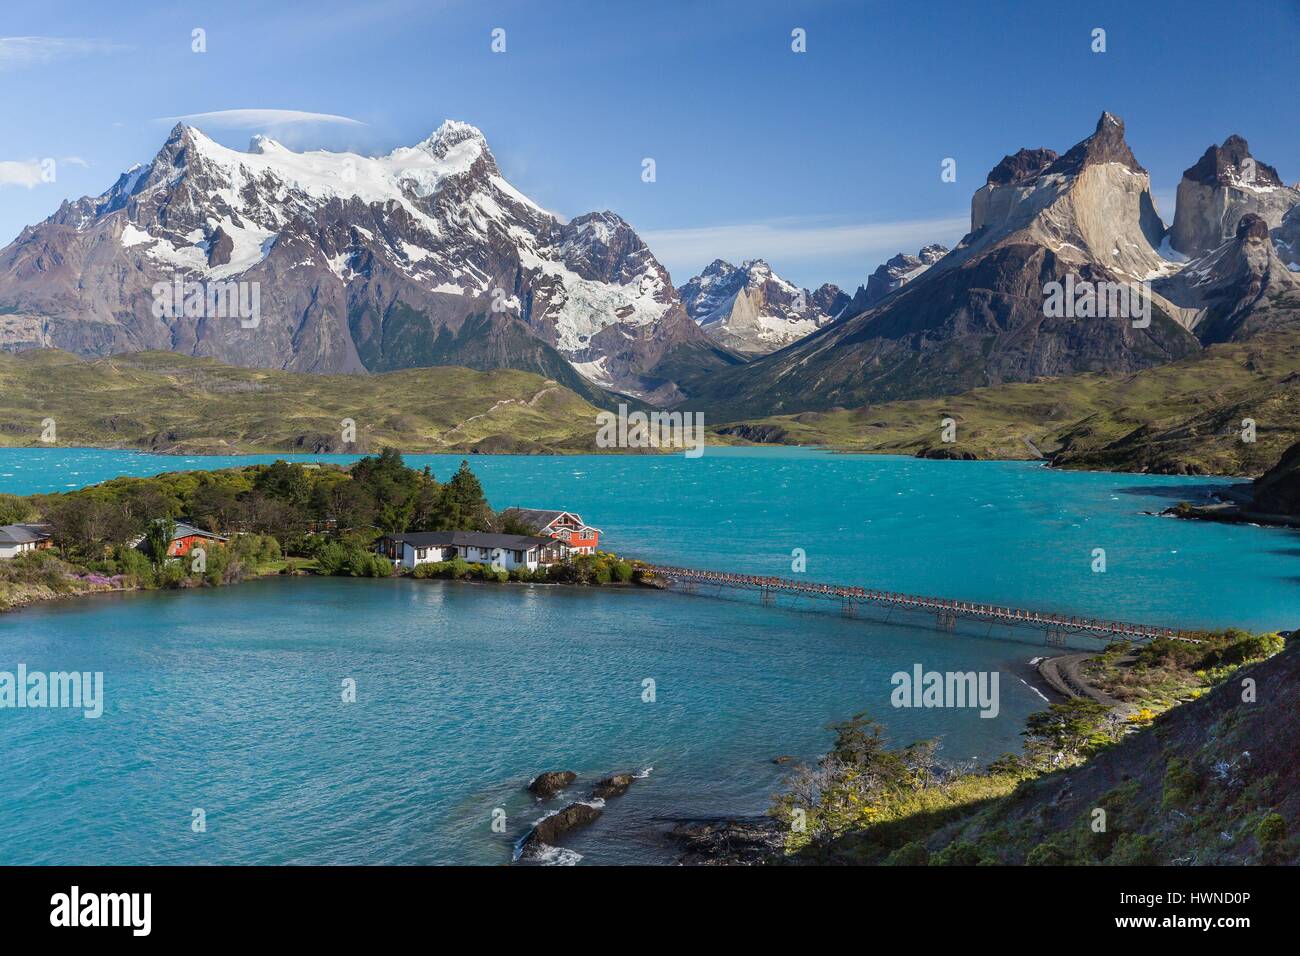 Chile, Patagonia, Aysen region, Torres del Paine national park, hotel and Pehoe lake Stock Photo